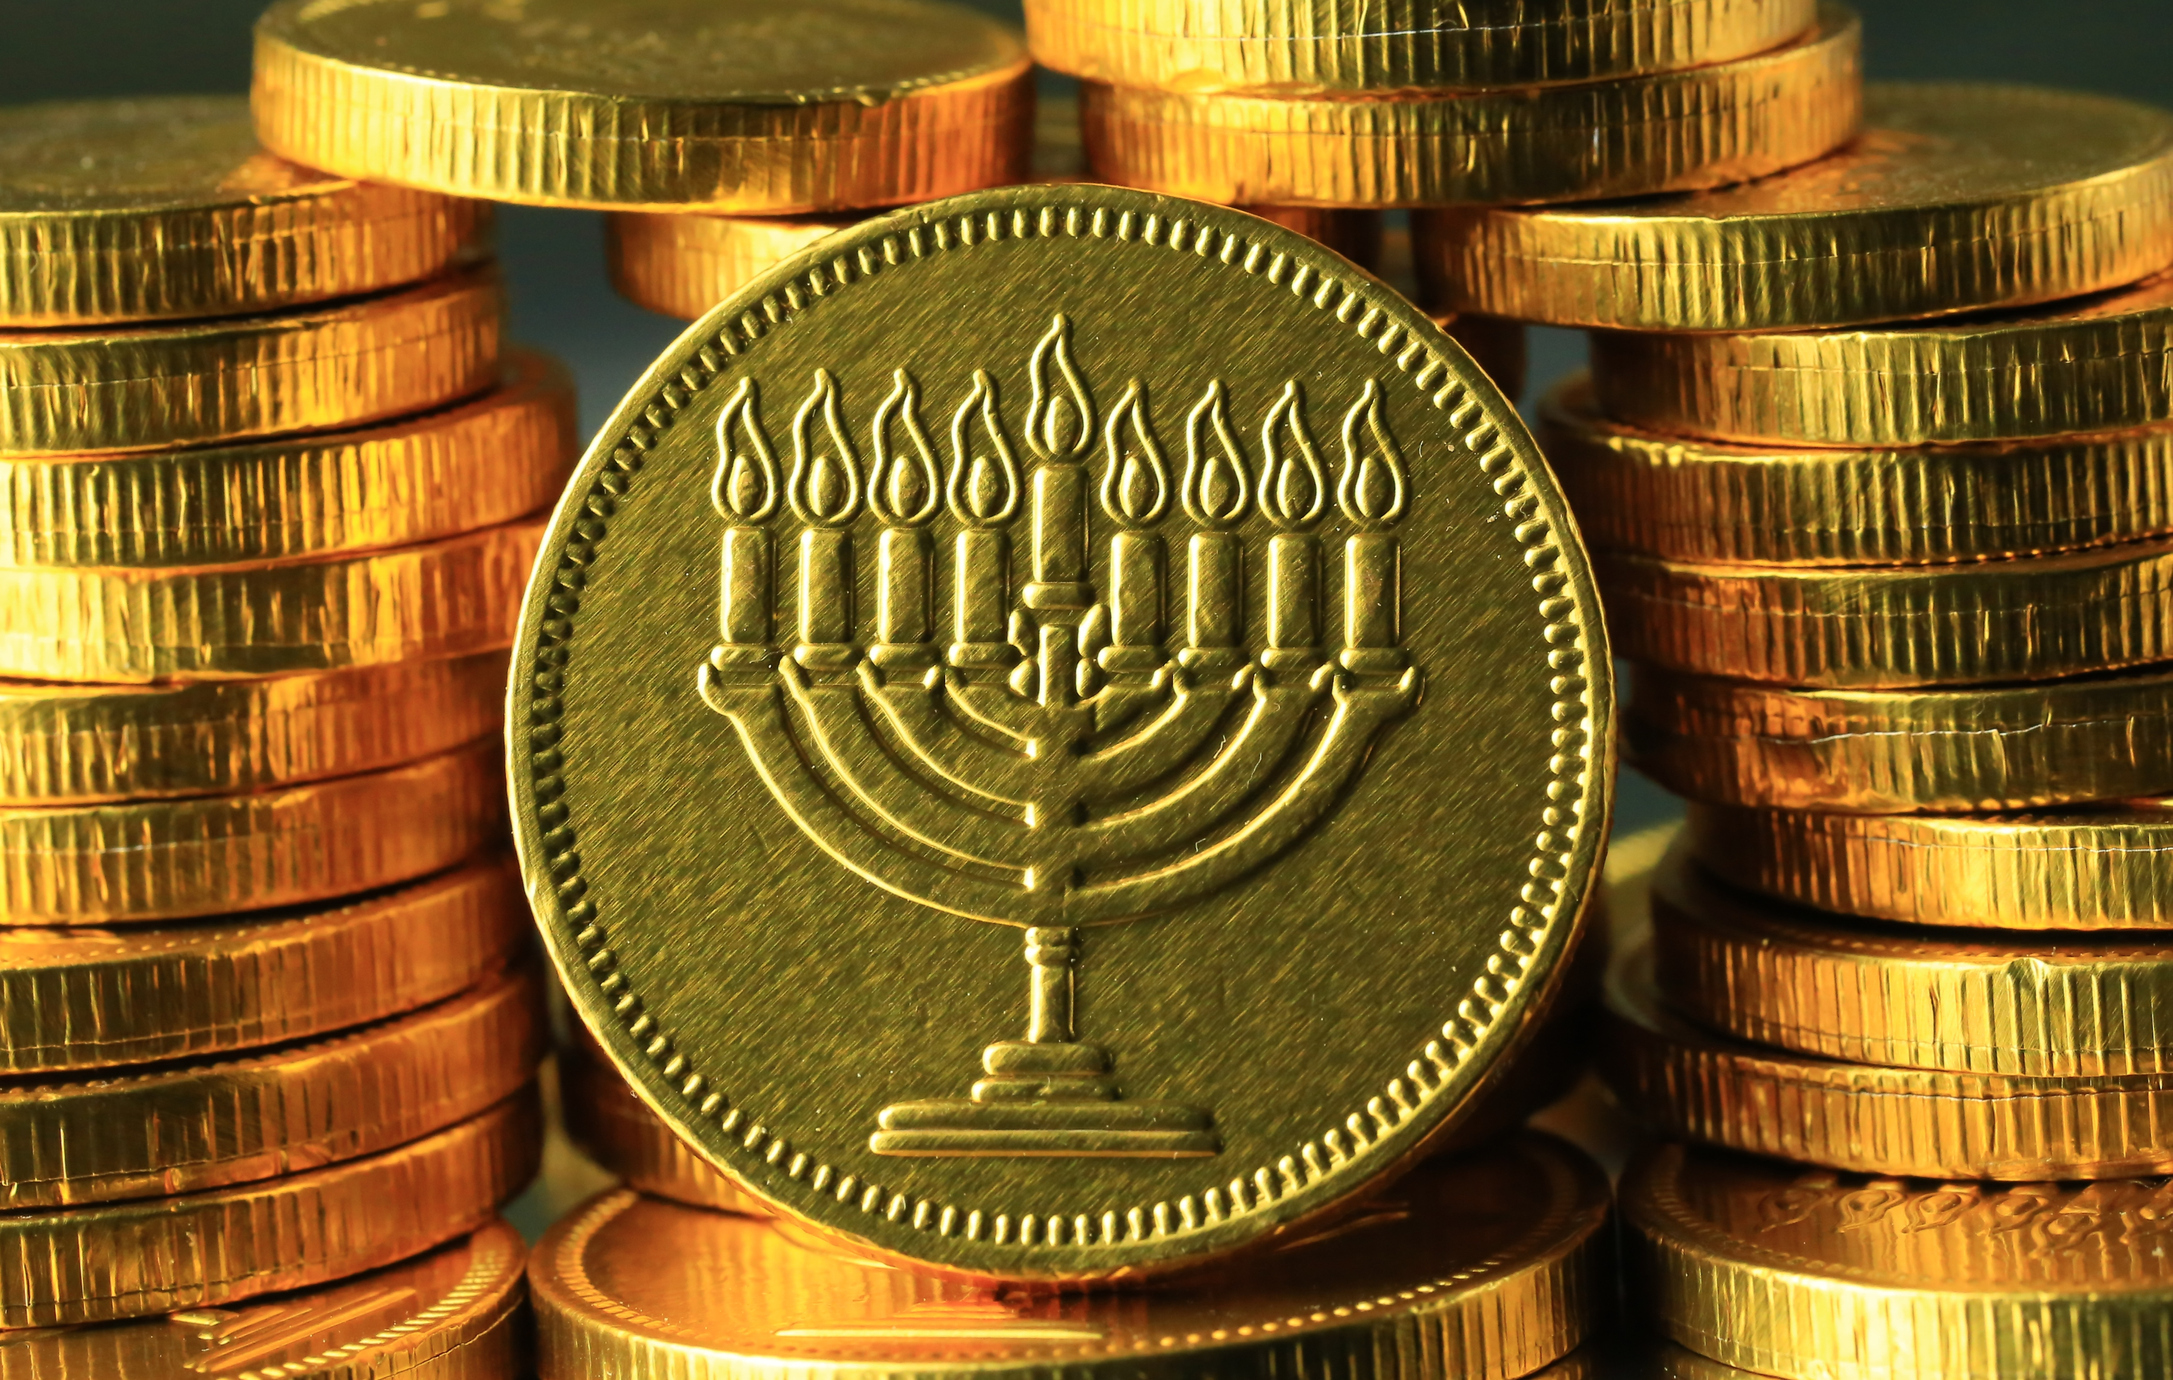 9 Things You Didn't Know About Hanukkah | My Jewish Learning